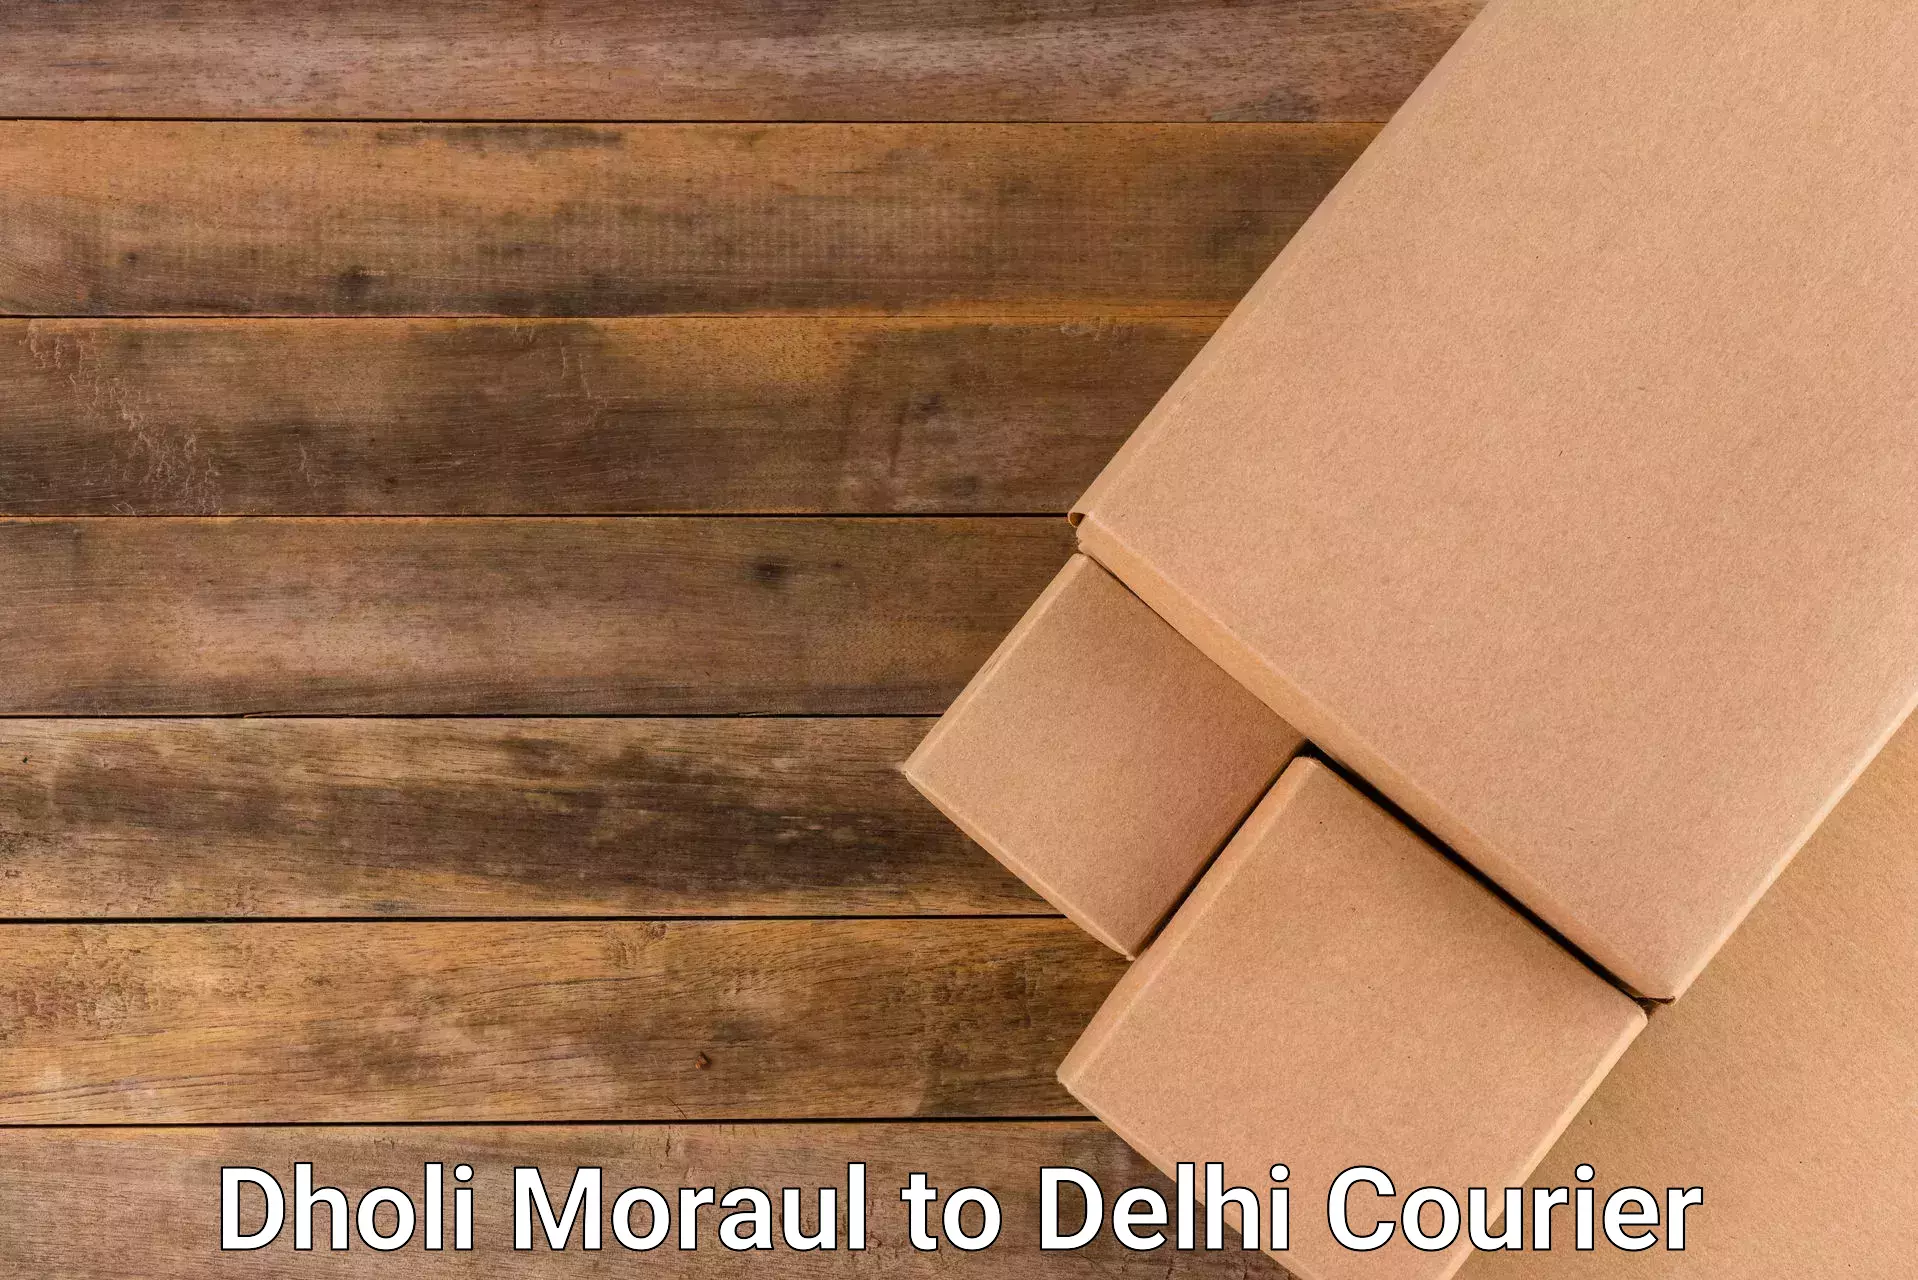 Nationwide shipping services Dholi Moraul to Lodhi Road